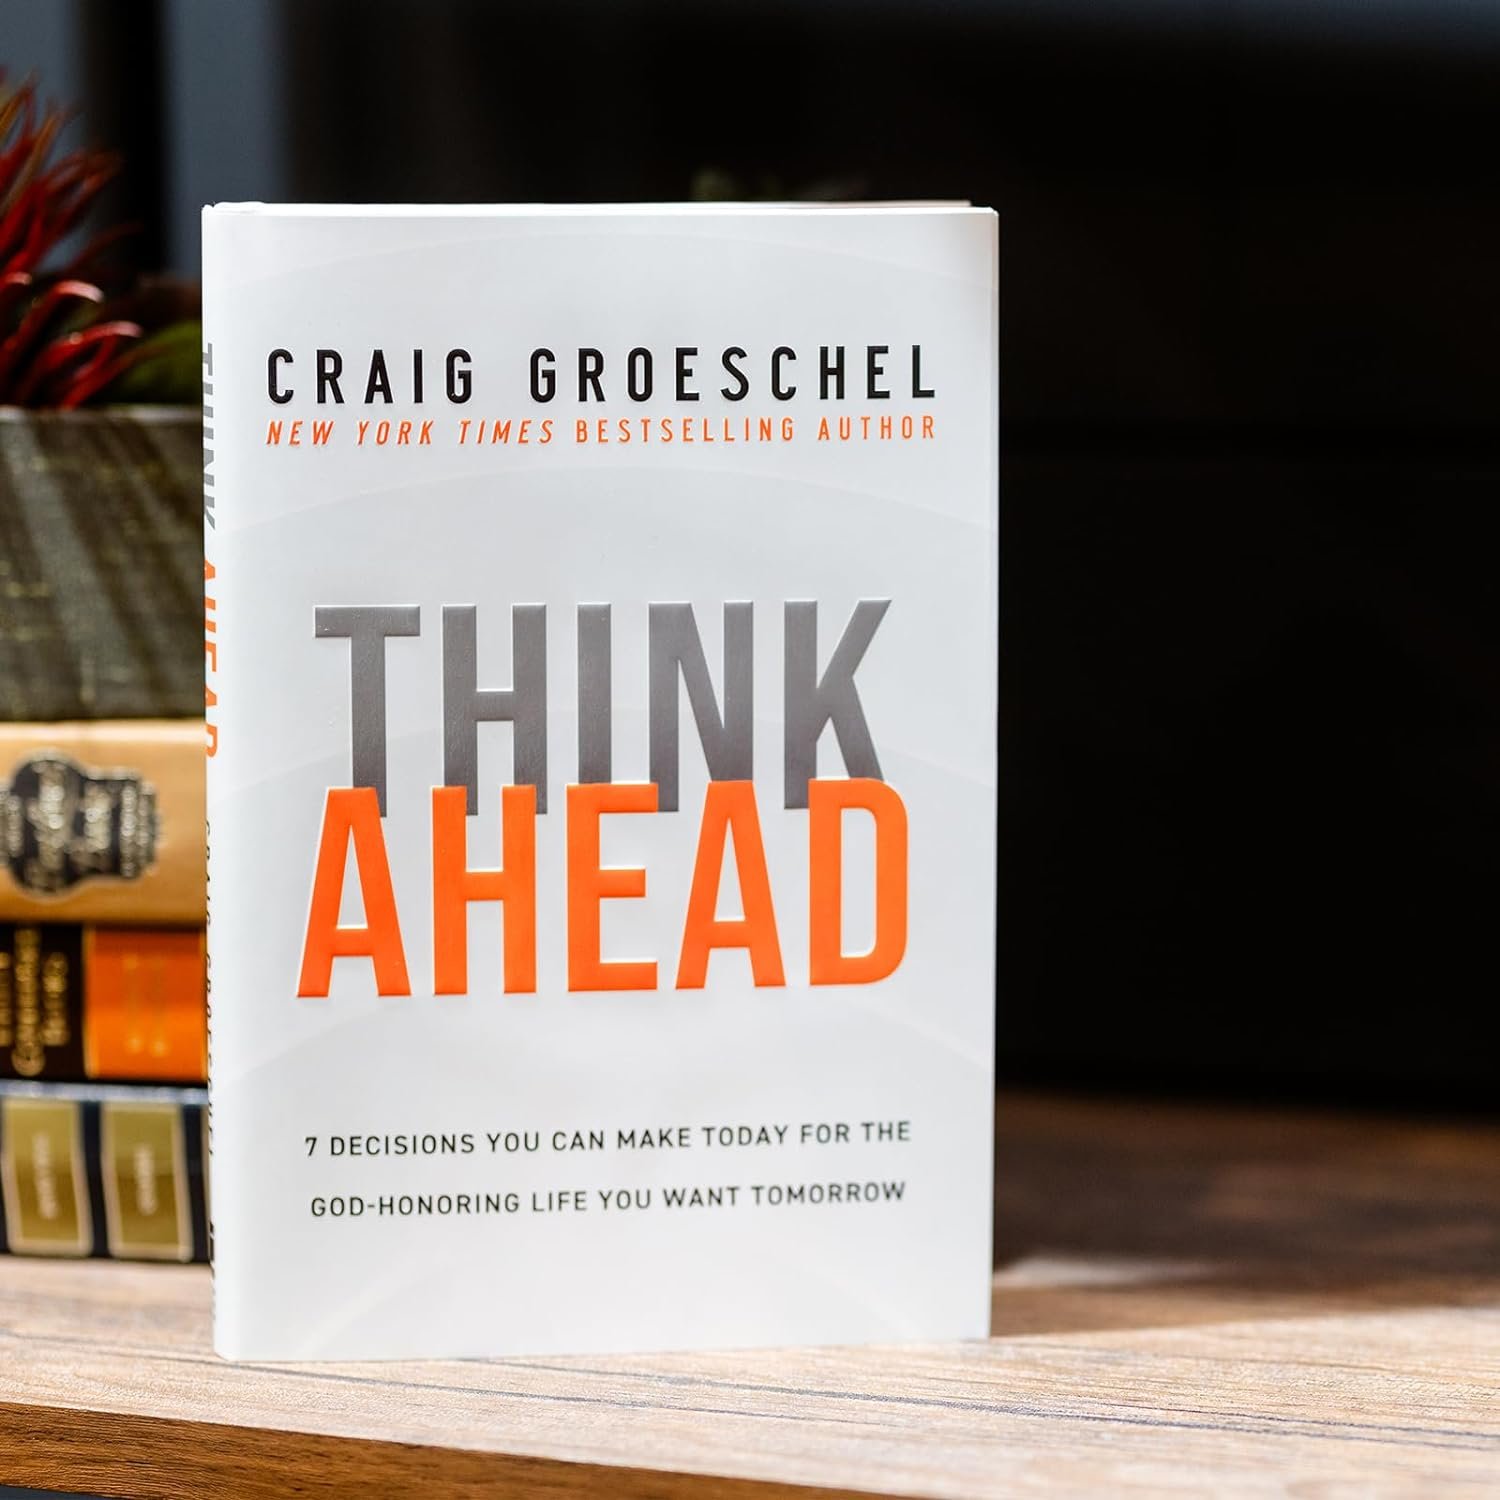 Think Ahead: 7 Decisions You Can Make Today for the God-Honoring Life You Want Tomorrow (Hardcover) - image 2 of 8